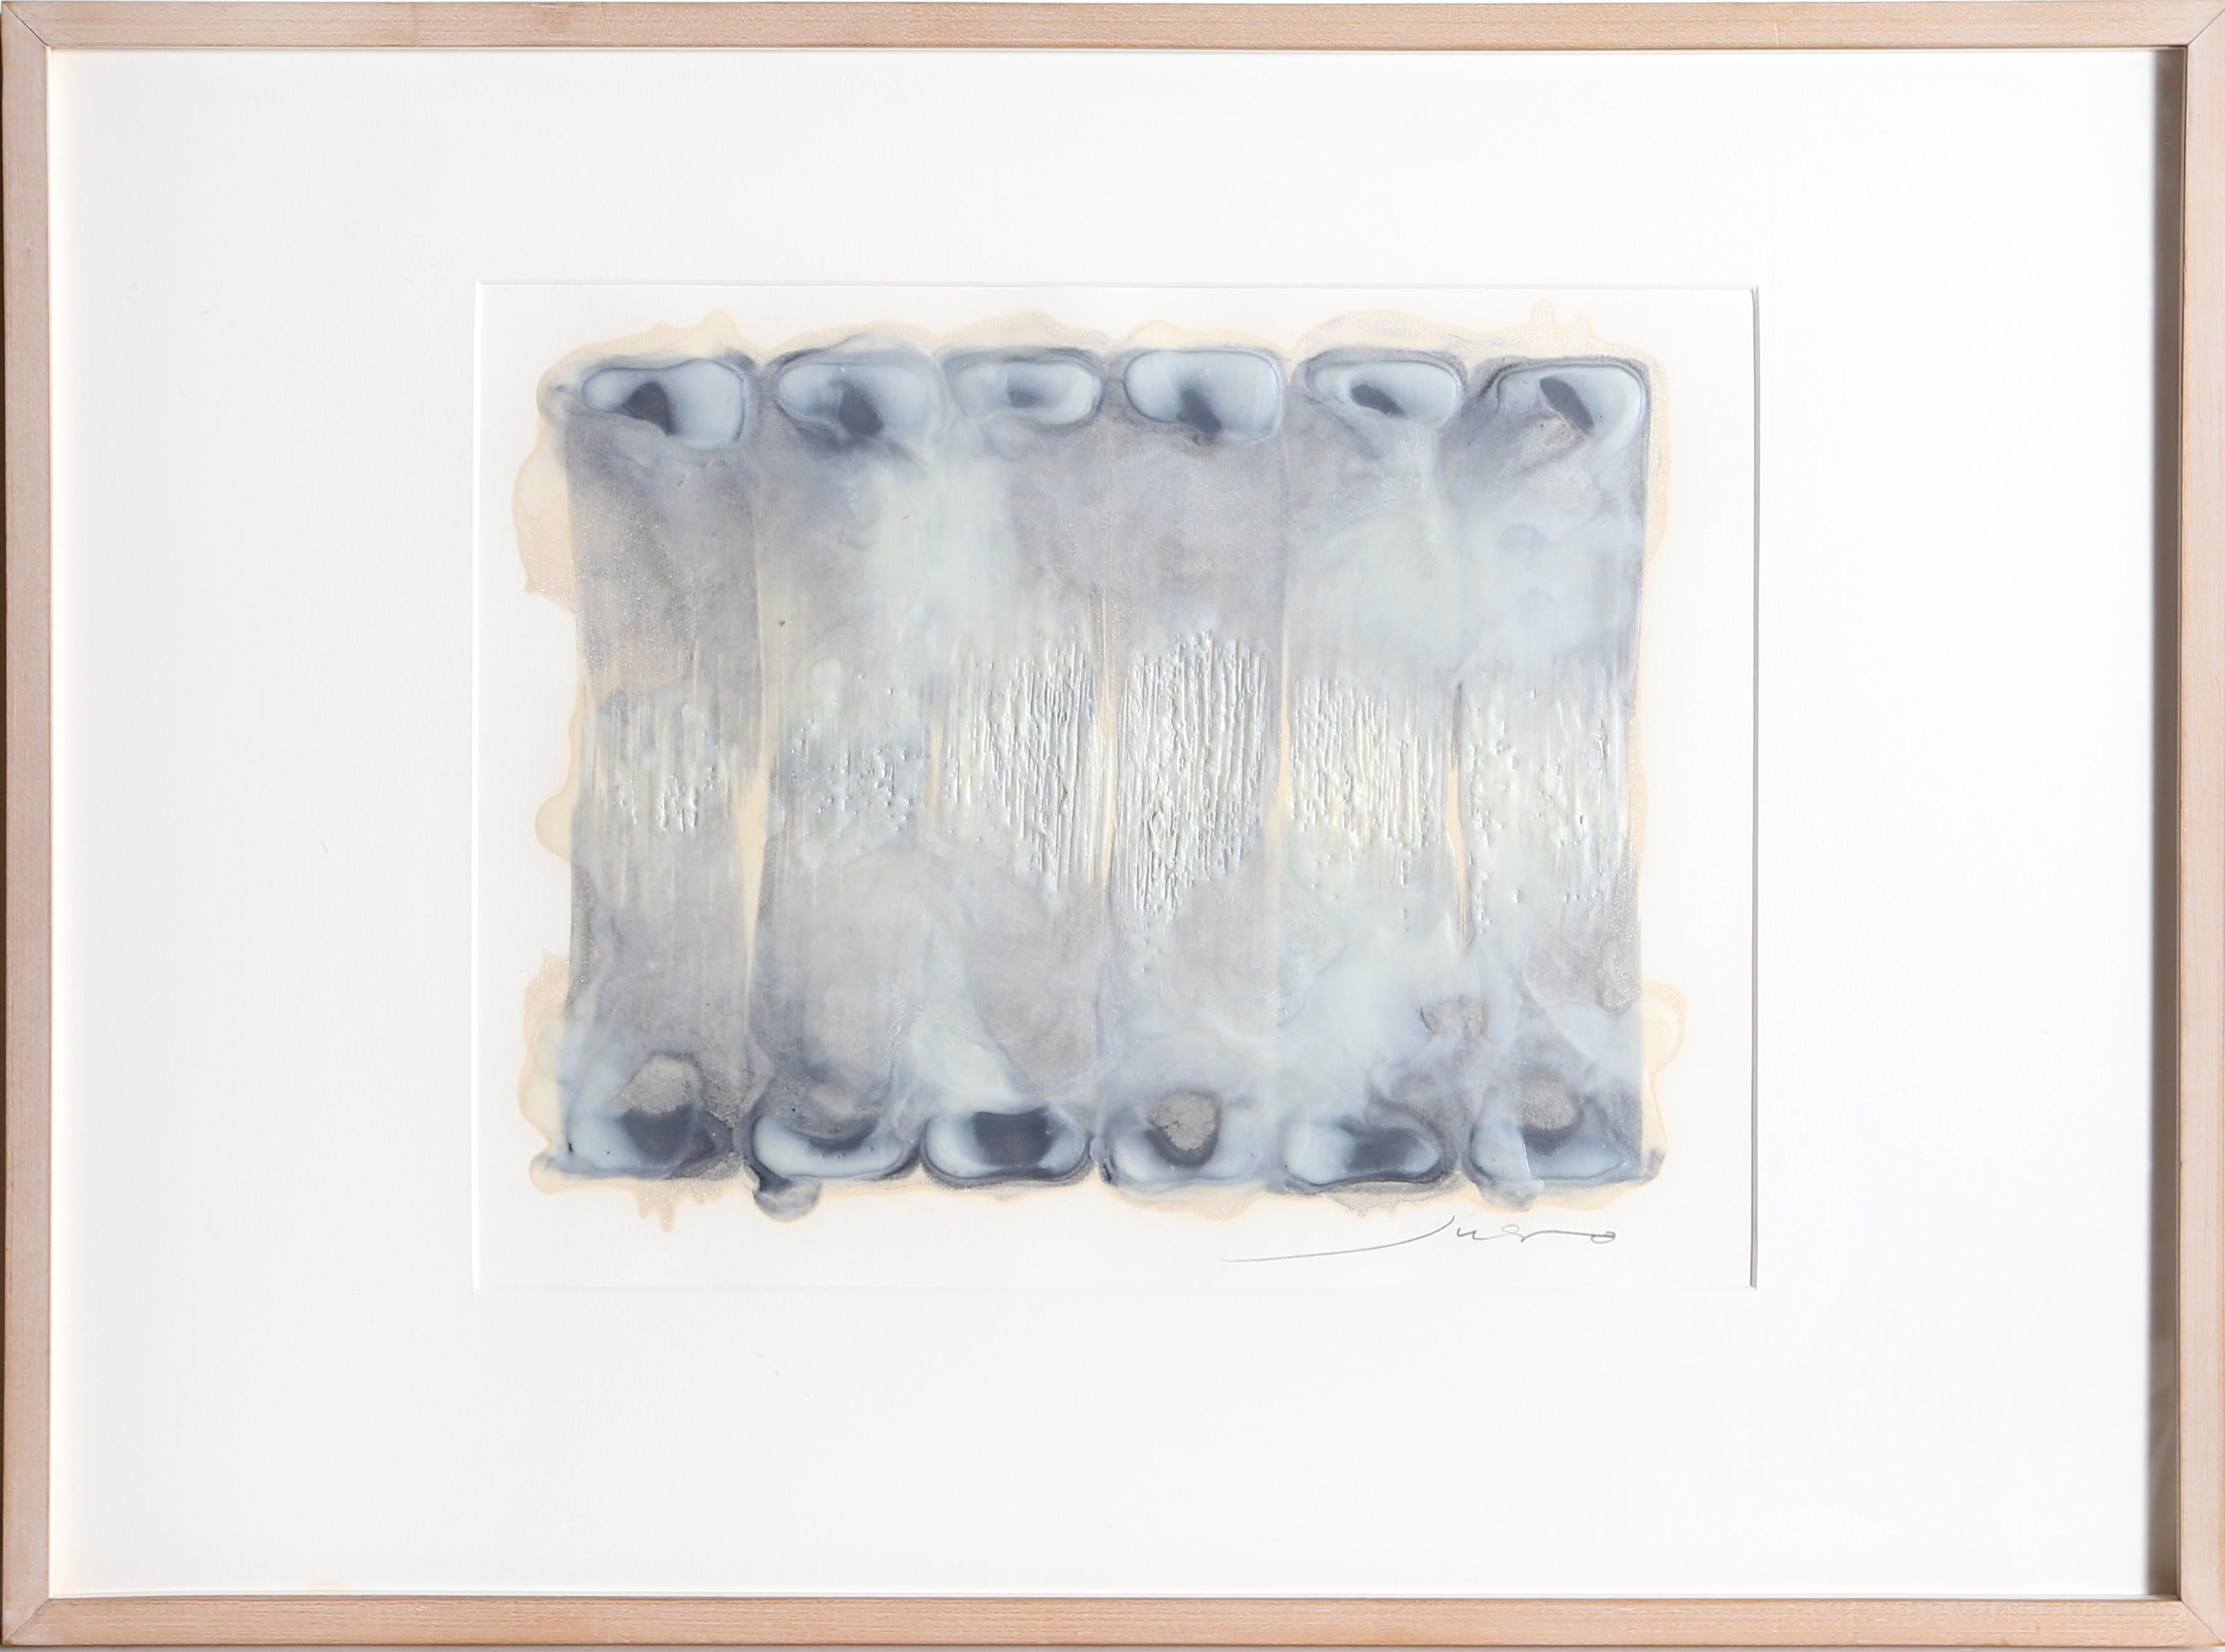 Artist:	Juhachiro Takada
Title:	Untitled III 
Medium:	Encaustic, Sand on Canvas, Signed in pencl
Paper Size: 10.5 x 12.5 inches
Frame Size: 19.5 x 20.5 inches